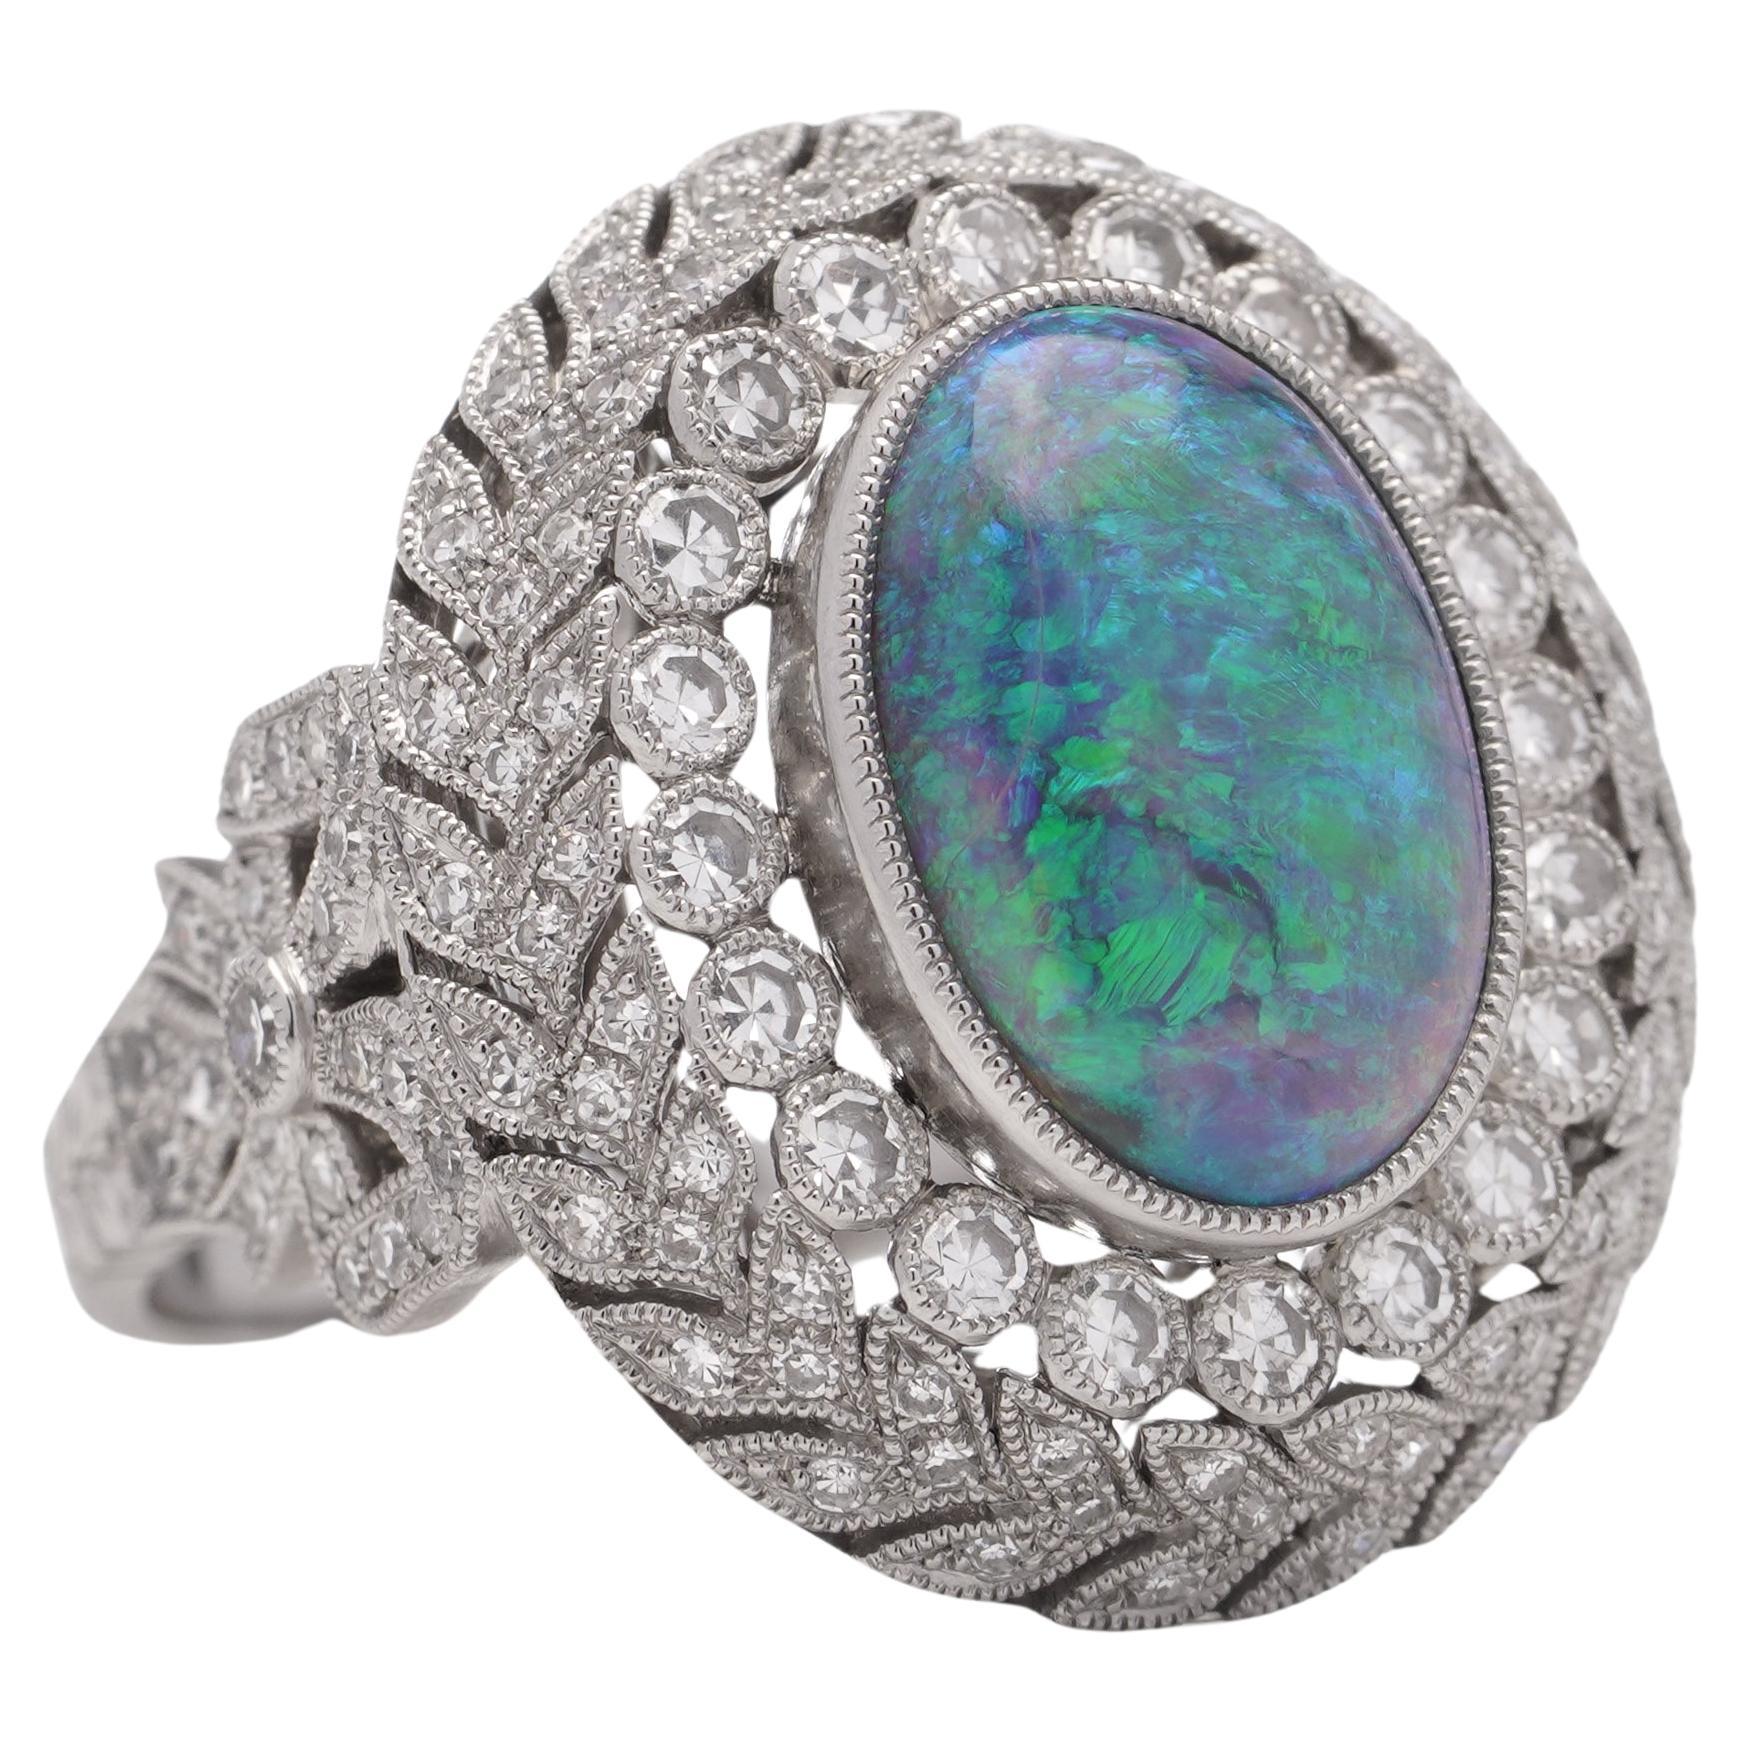 JoAq 850 Platinum 3.30 carats of Oval Opal cluster ring 